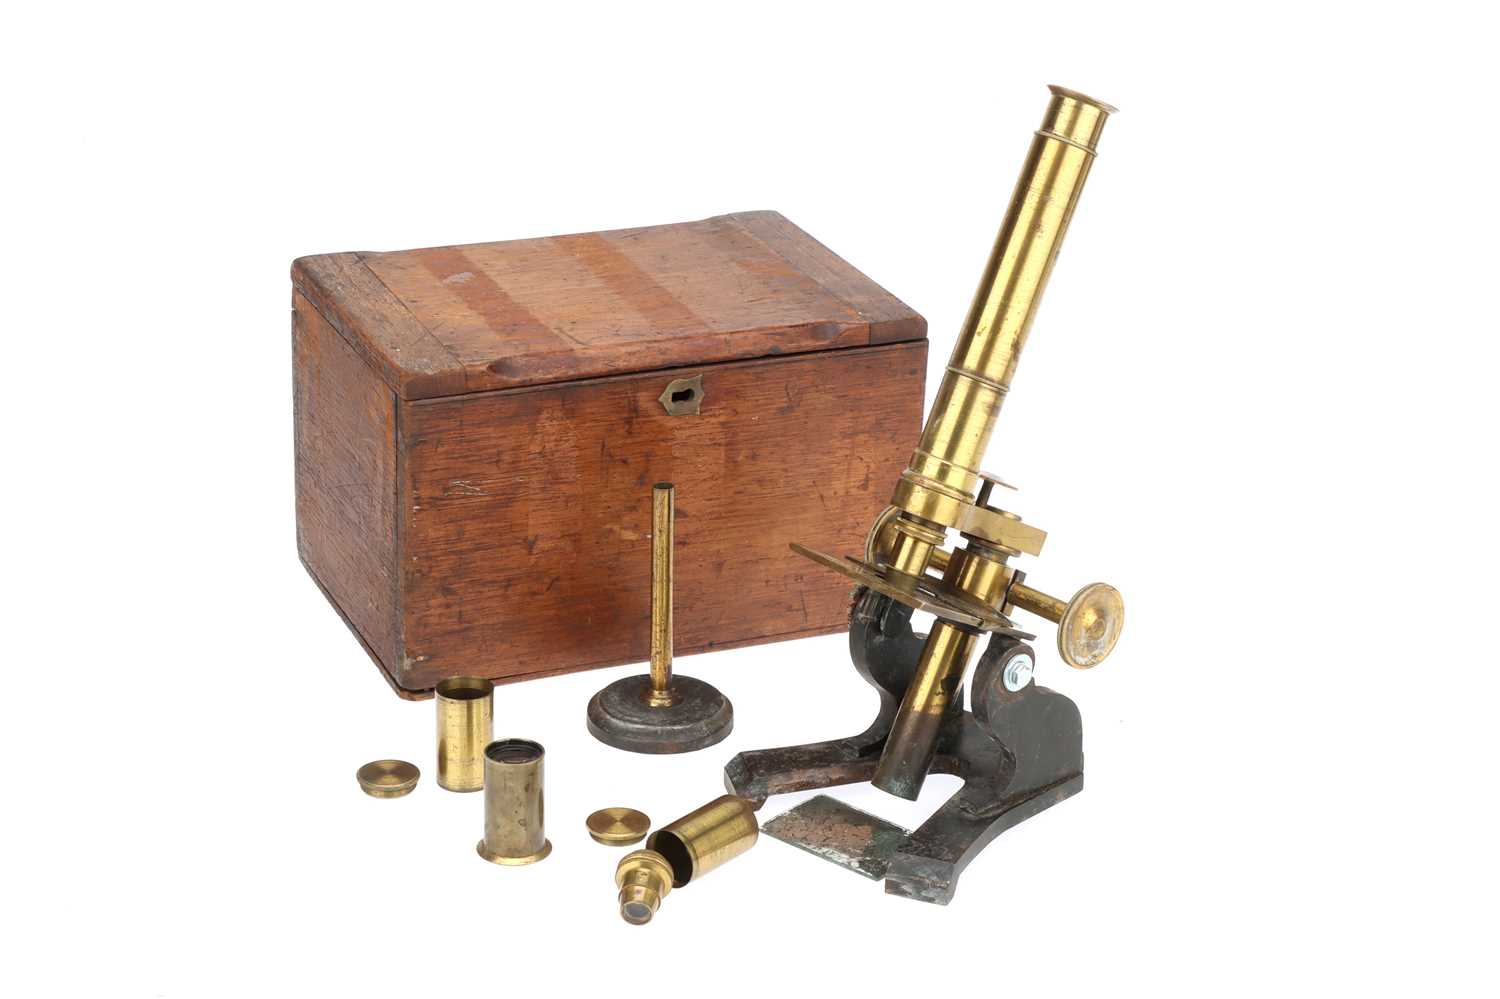 Lot 50 - A Late 19th Century Society of the Arts Student Microscope